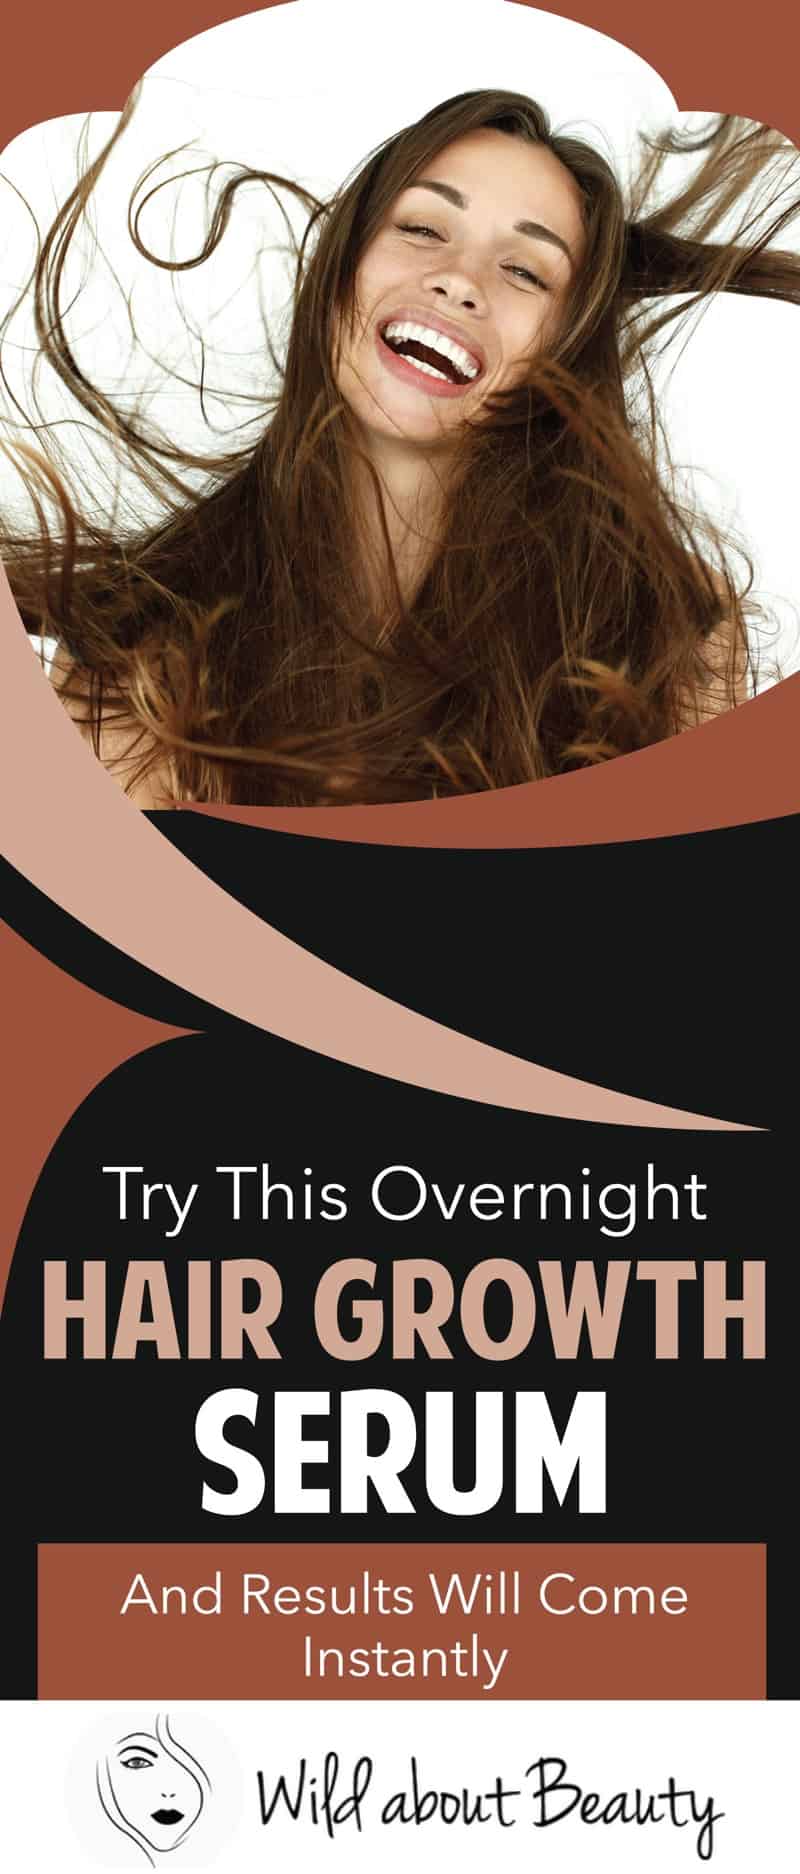 Try This Overnight Hair Growth Serum